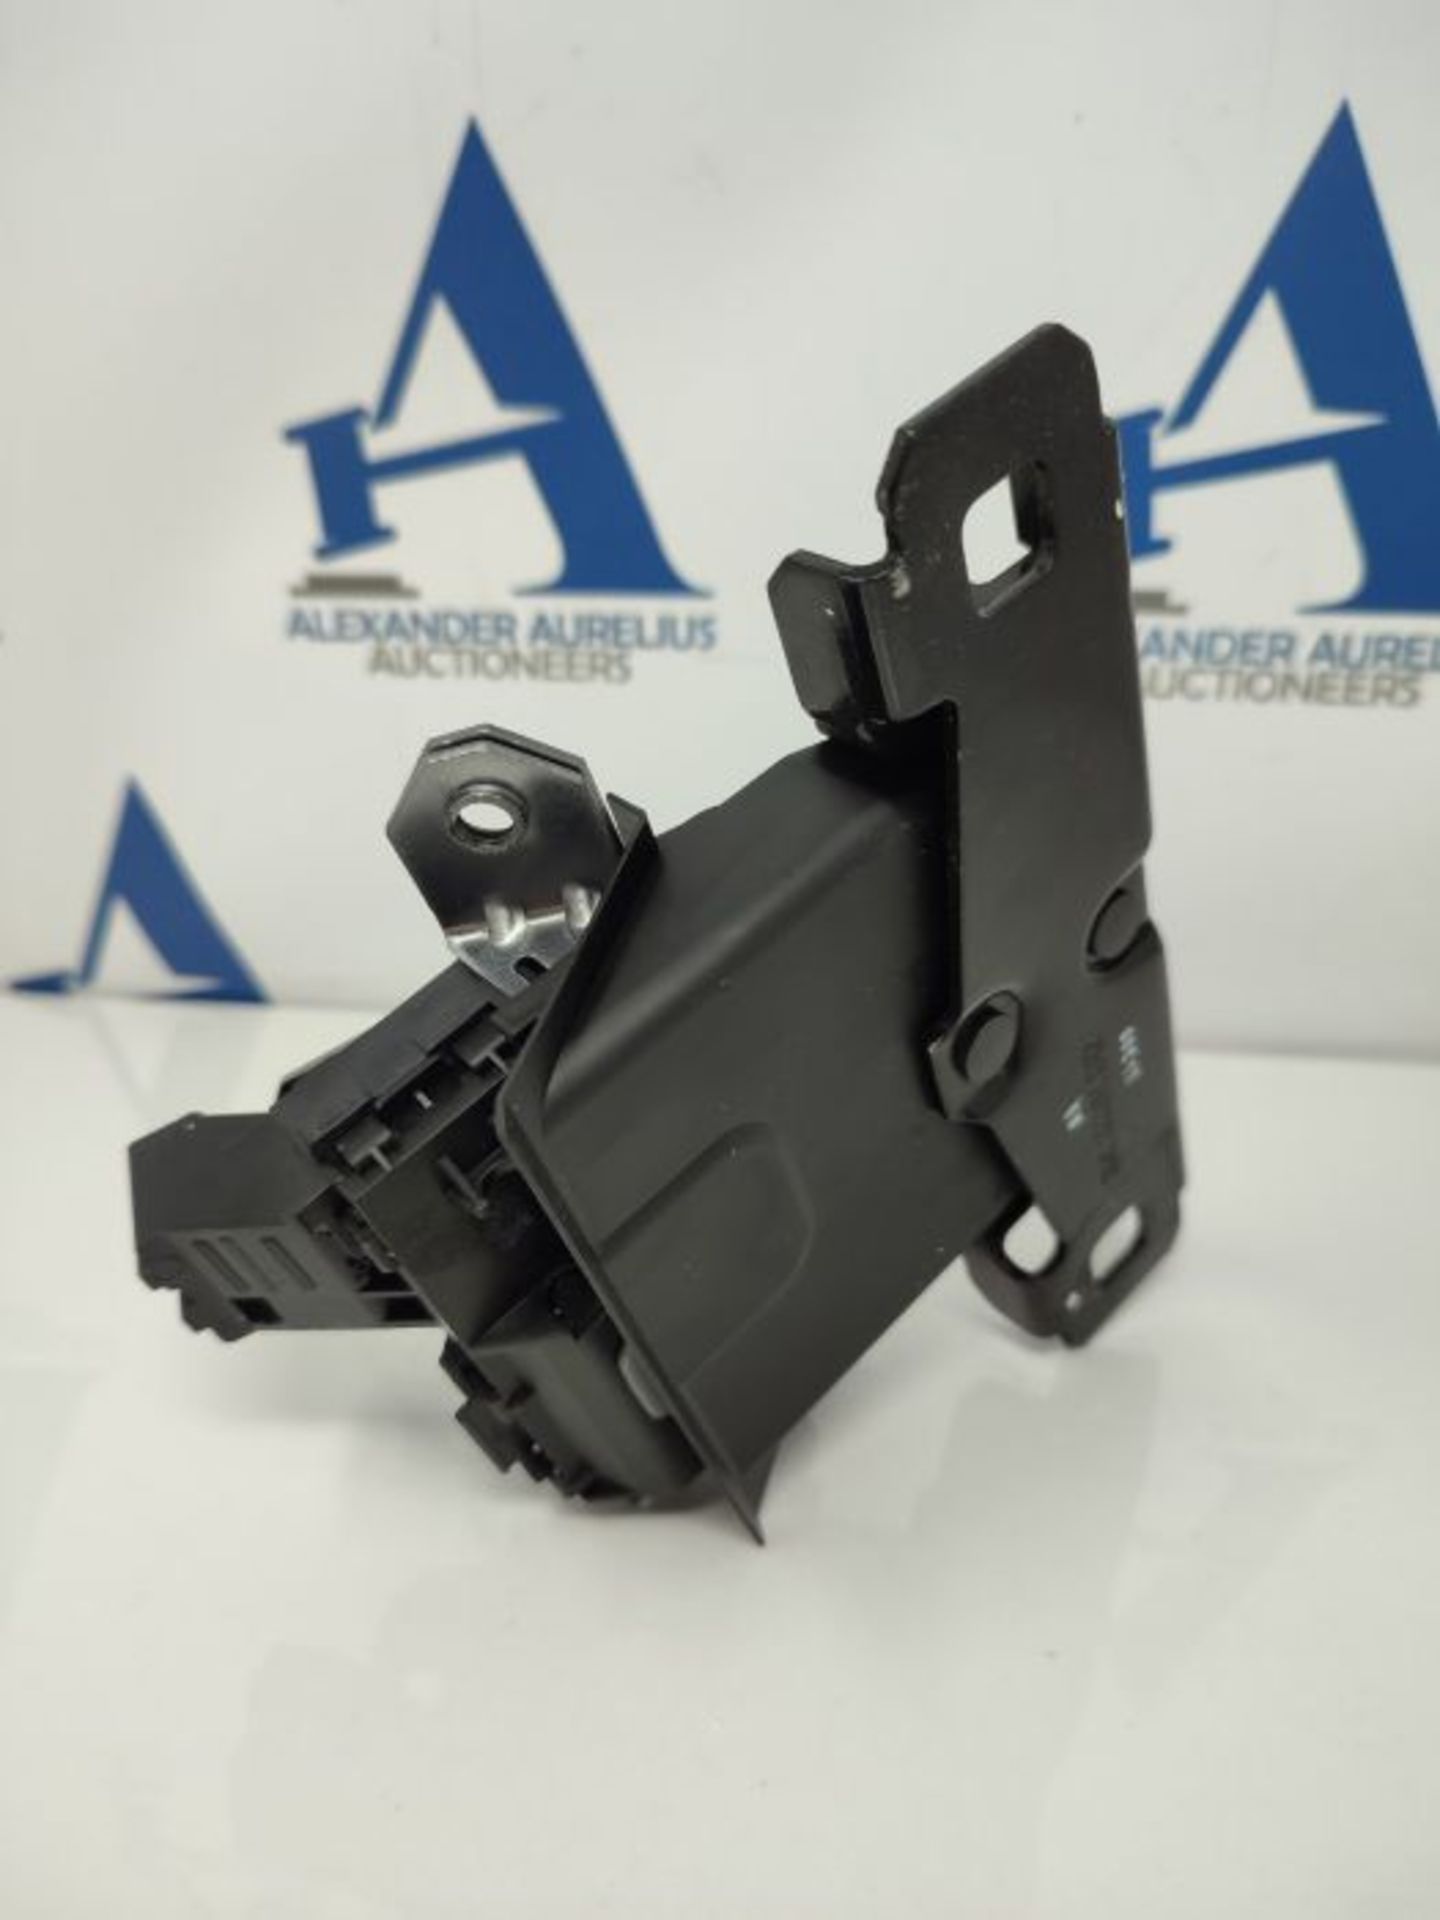 KASturbo Rear Tailgate Lock, Car Trunk Boot Latch Actuator for Focus S-Max 8M51R442A66 - Image 2 of 2